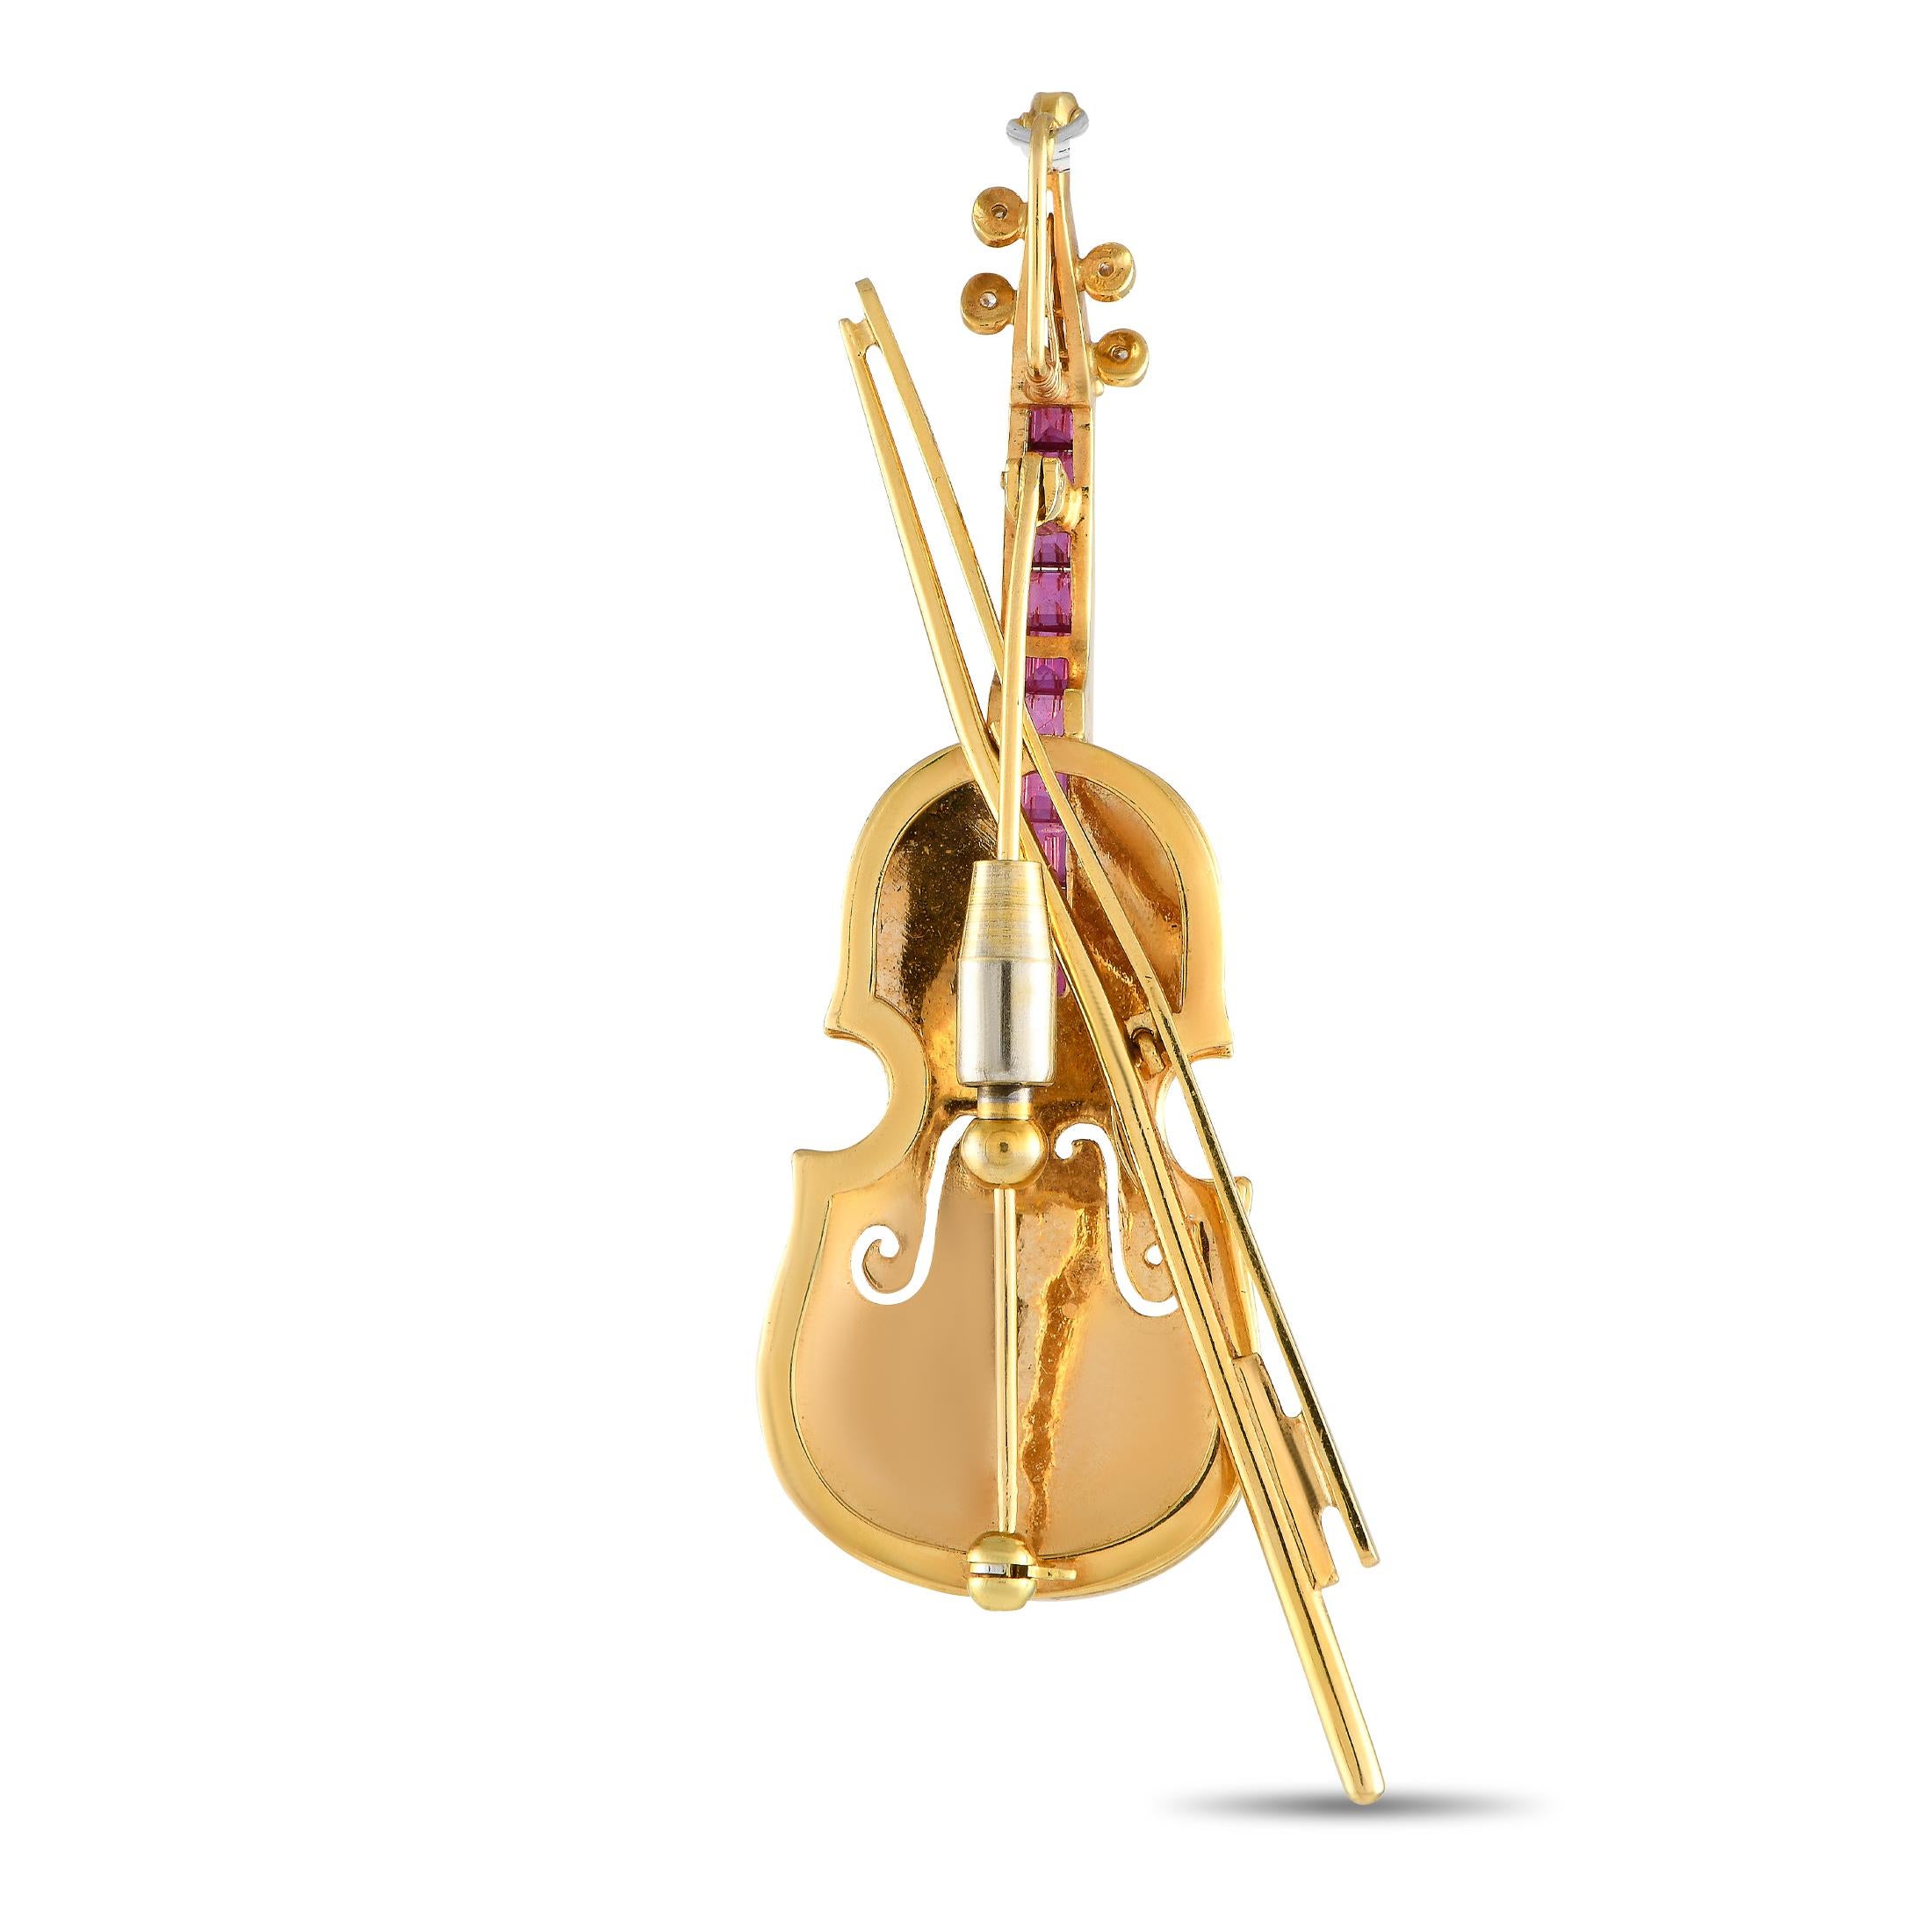 Inset Ruby gemstones totaling 1.0 carats and sparkling Diamonds with a total weight of 0.15 carats add extra dimension and depth to this exquisite brooch. Shaped like a violin, this intricate accessory is crafted from 18K Yellow Gold and measures